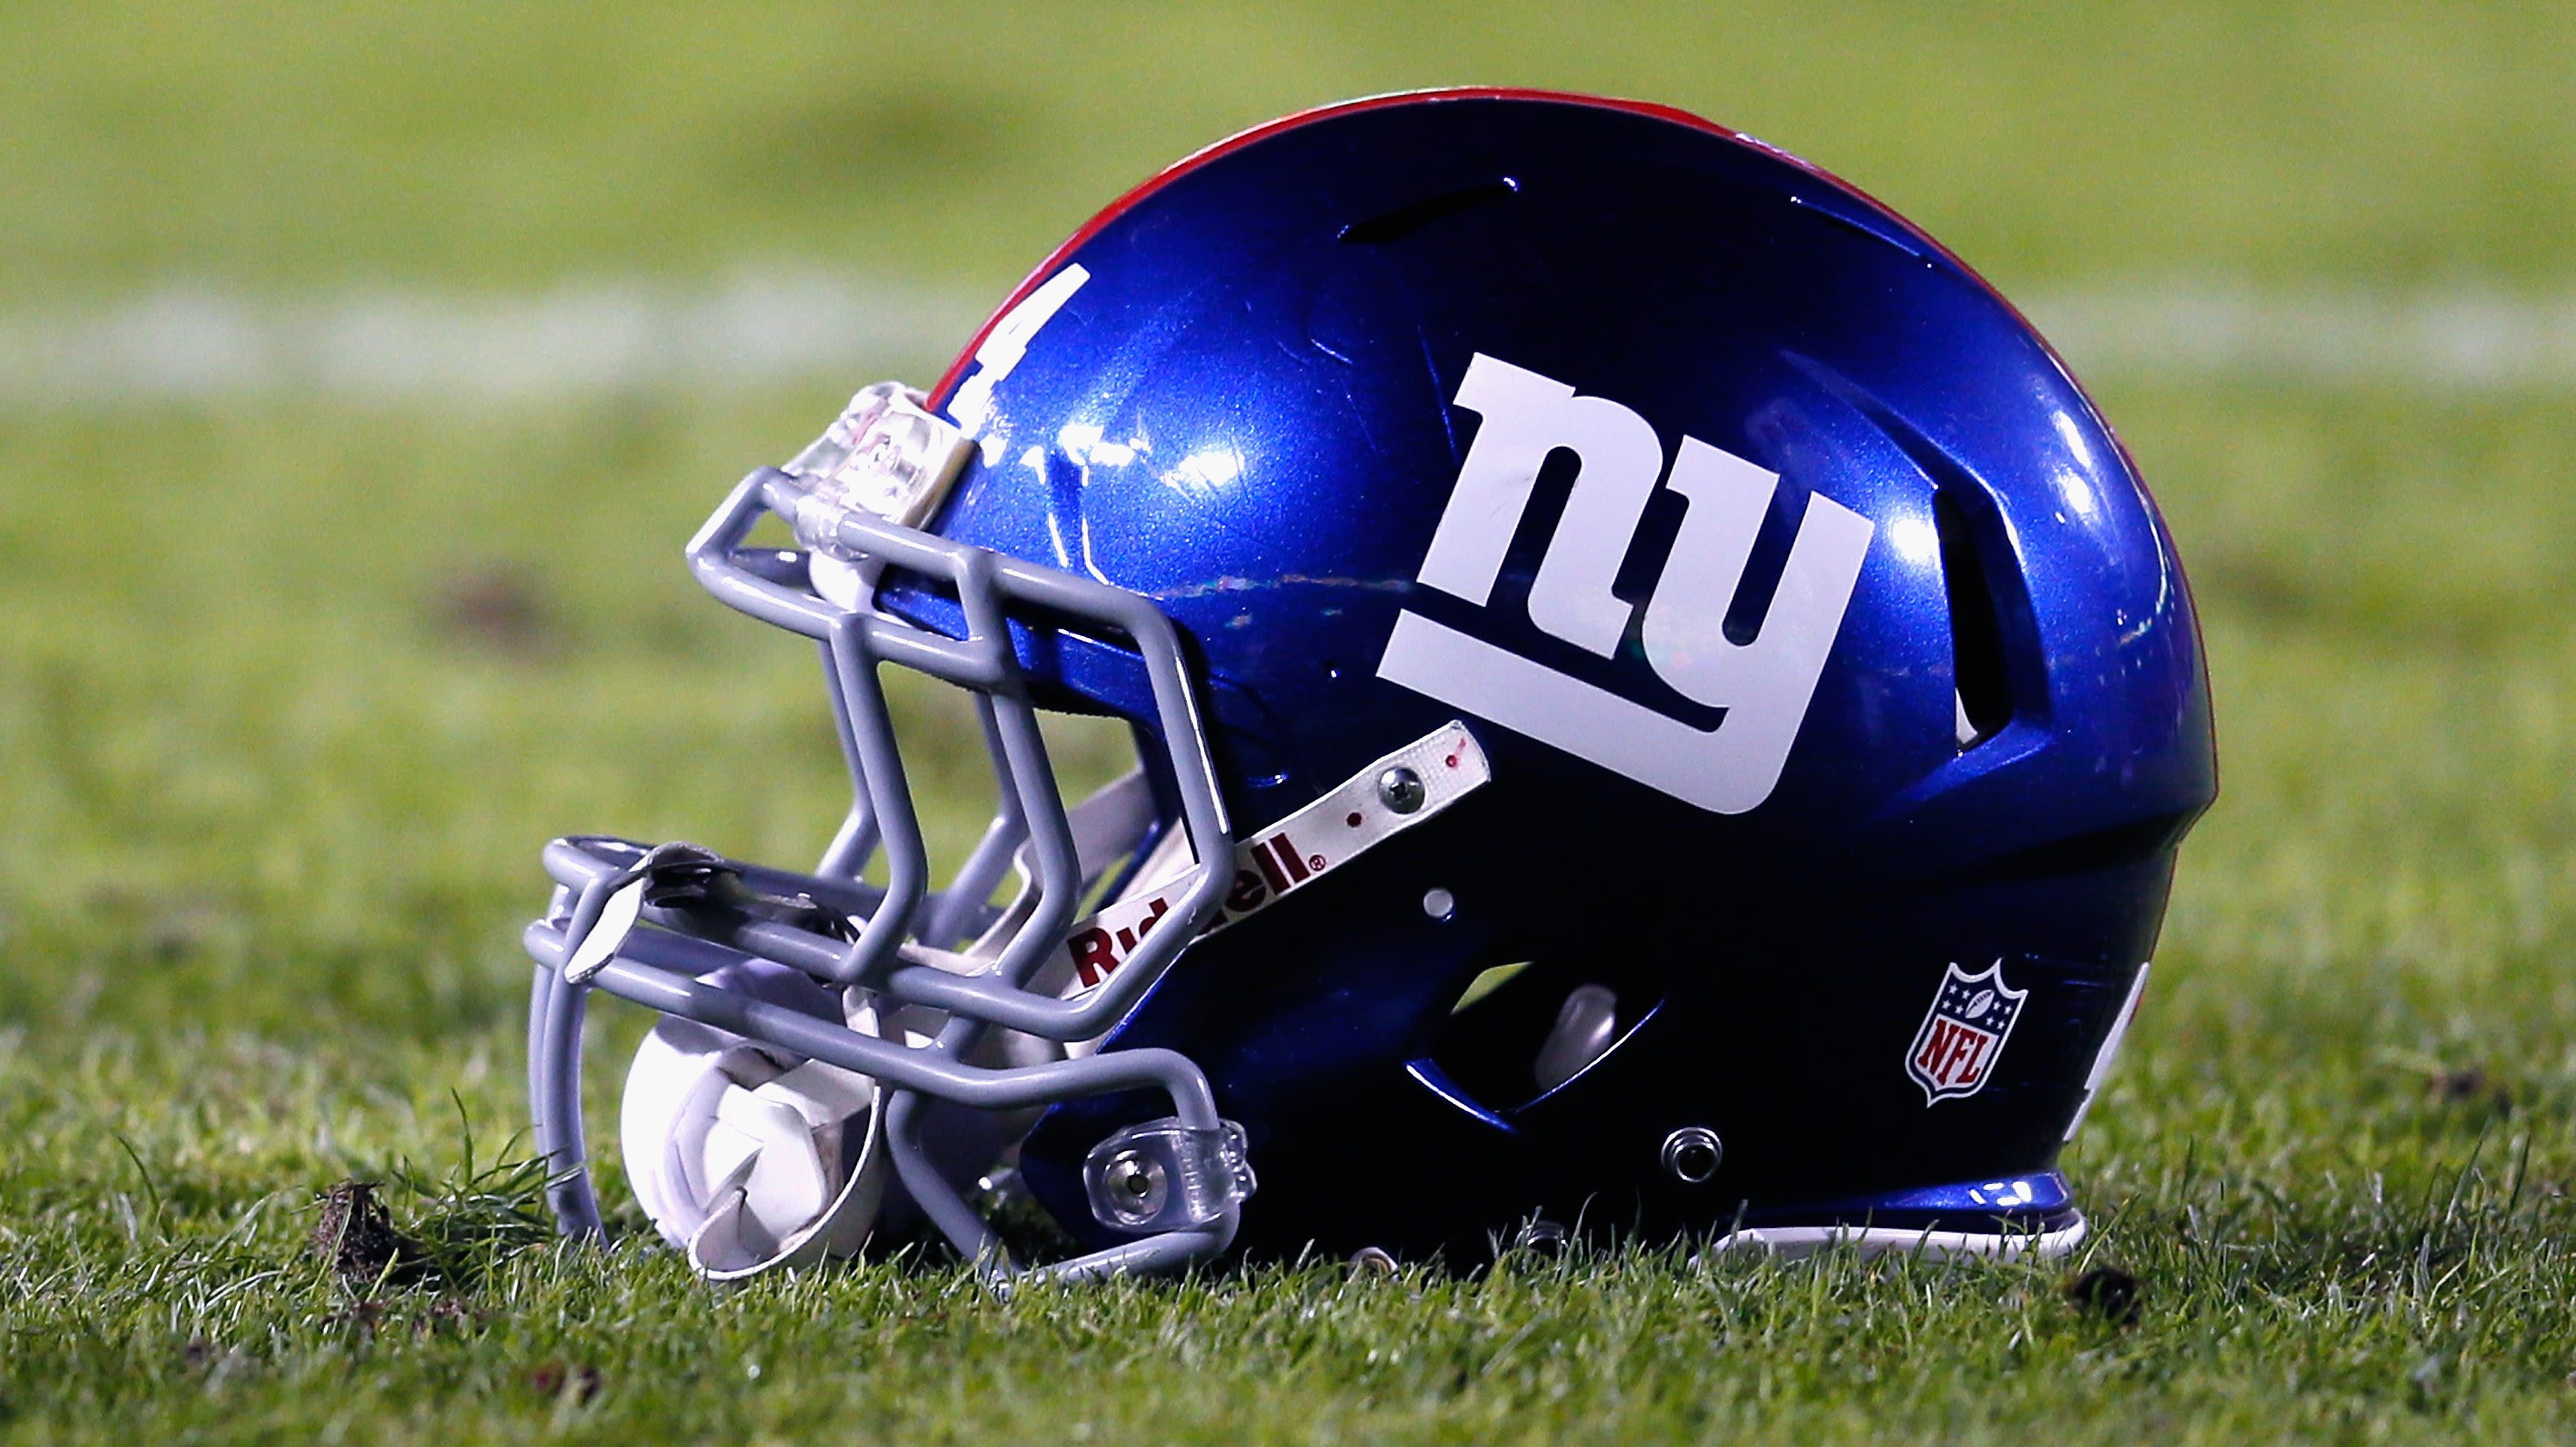 New York Giants To Appear On ‘NFL Hard Knocks’ Ahead Of Franchise’s 100th Season